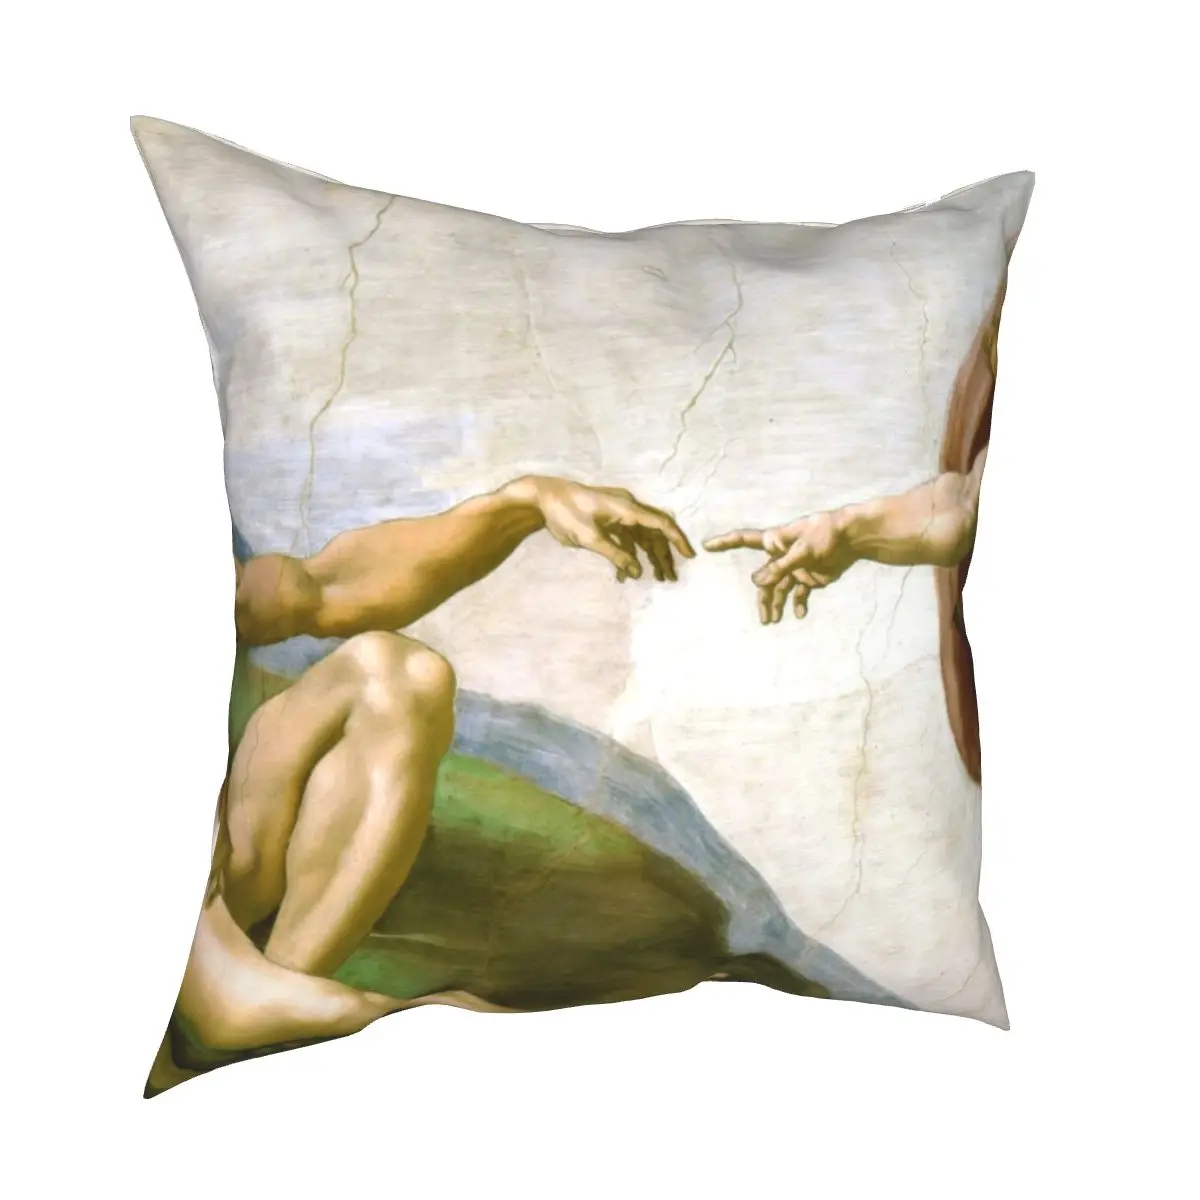 

The Creation Of Adam Pillowcase Cushion Cover Decoration Michelangelo Jesus Christian Throw Pillow Case Cover Home 45*45cm